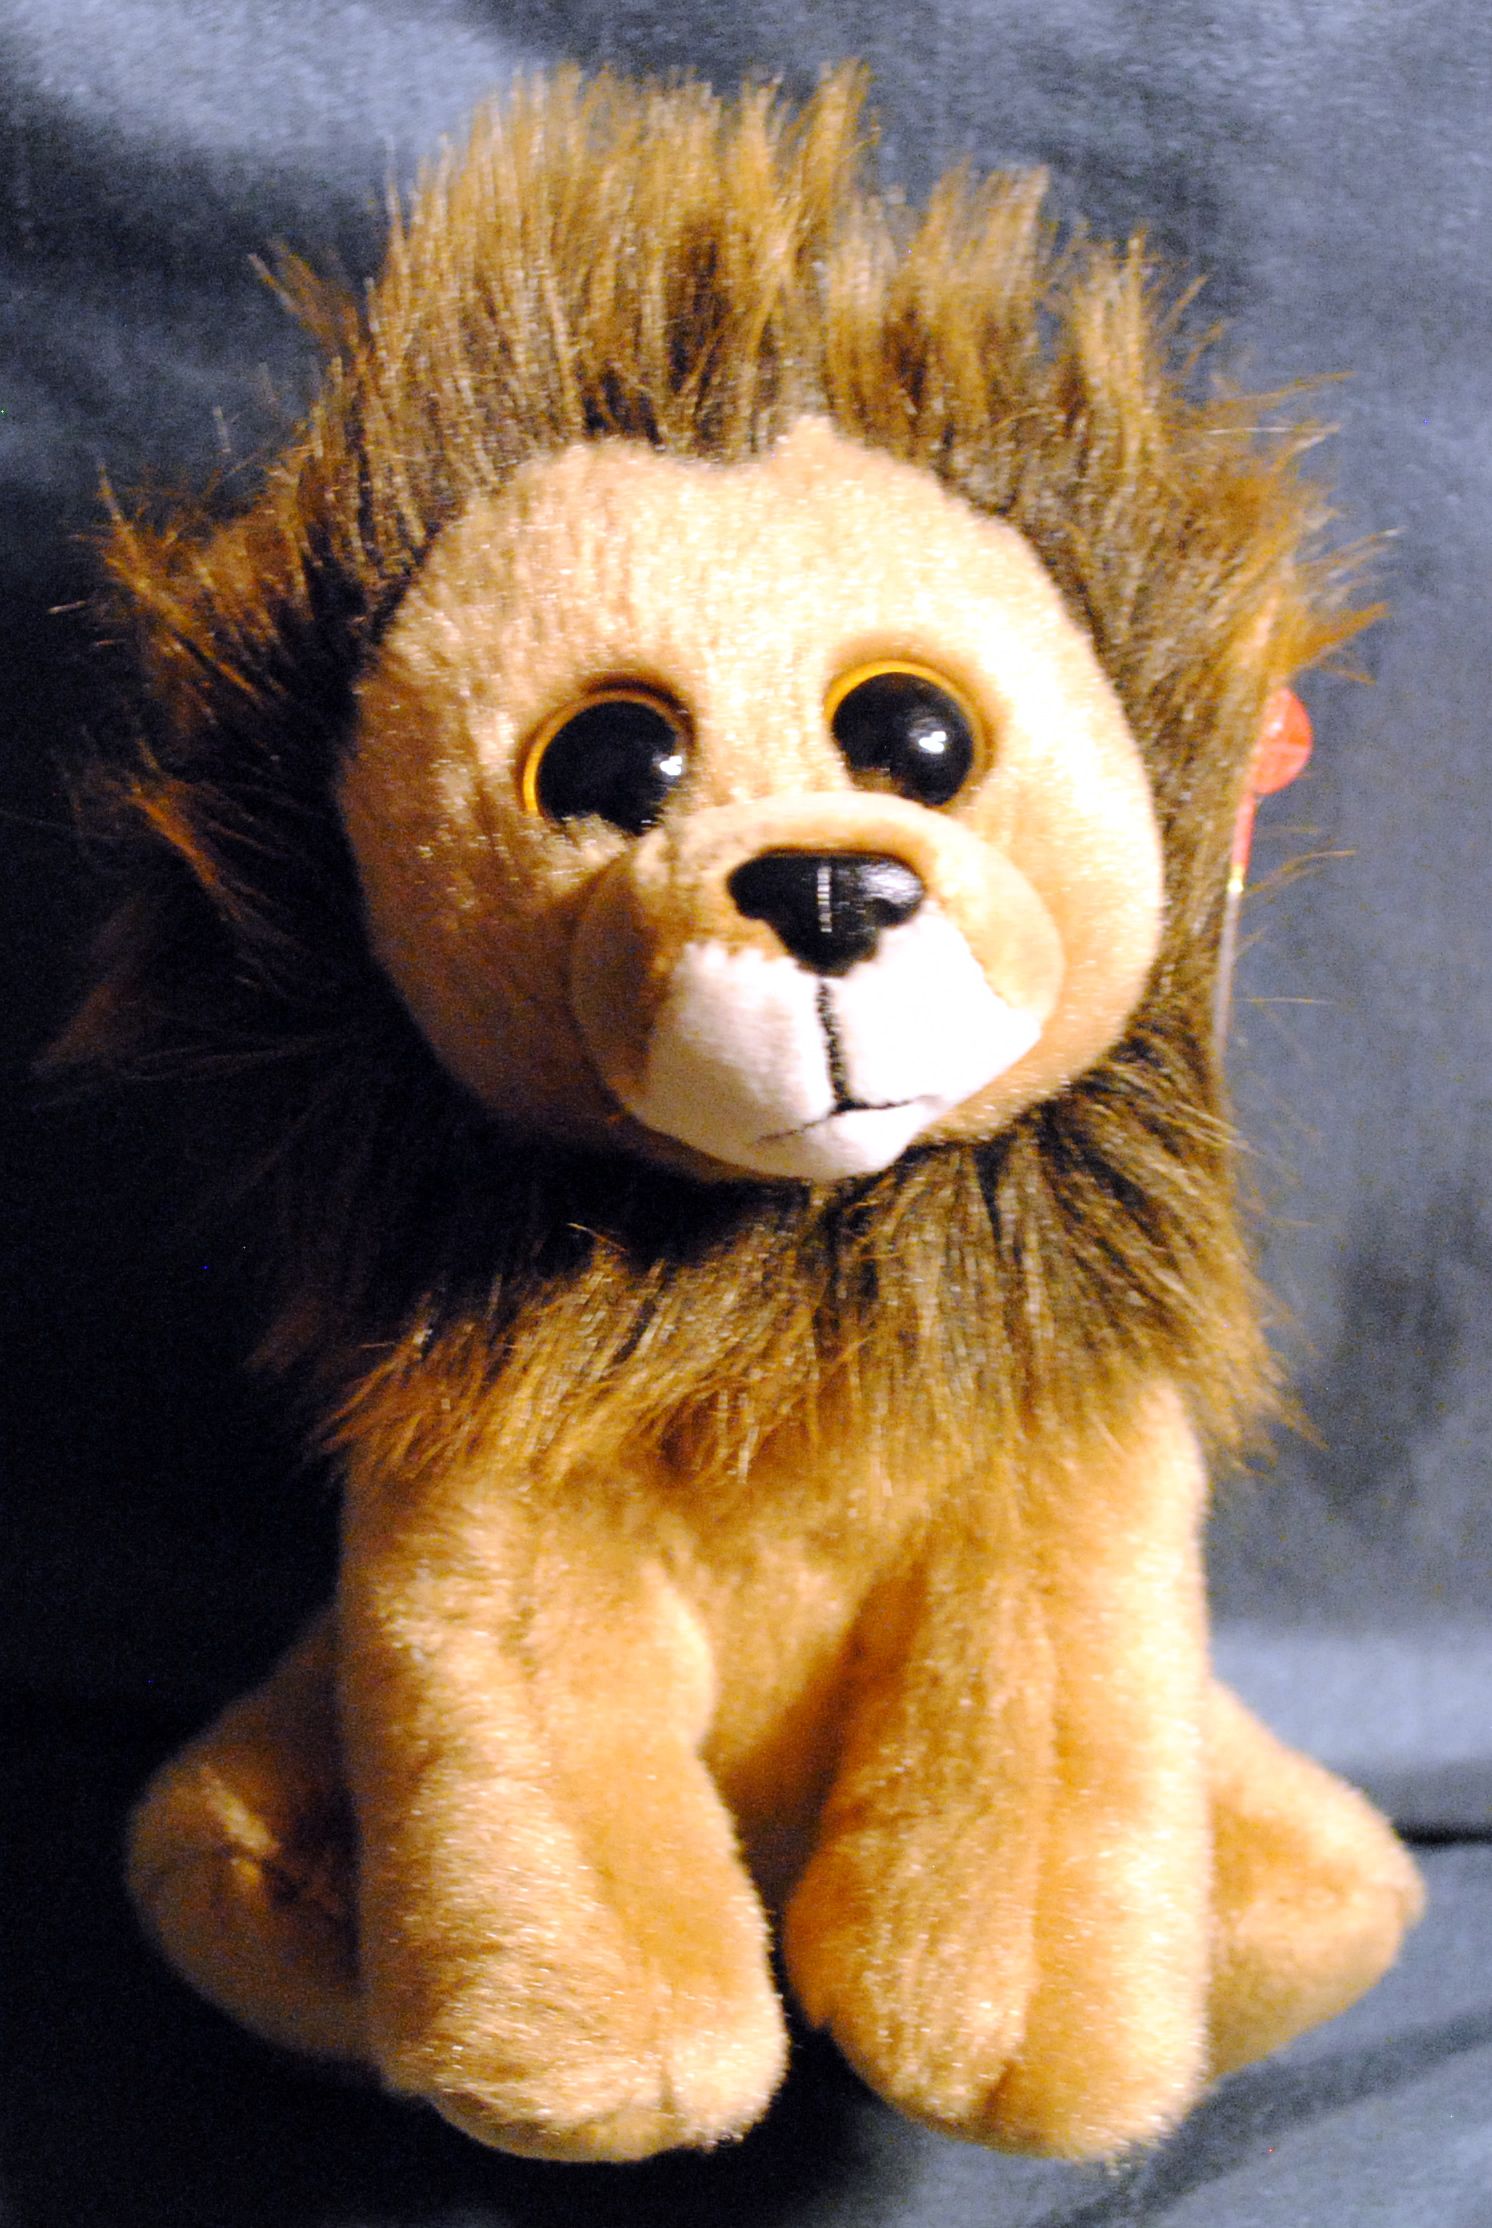 TY Original Beanie Babies Plush Cecil the Lion - TY (TY Beanie Babies) action figure collectible [Barcode 0008421421336] - Main Image 1